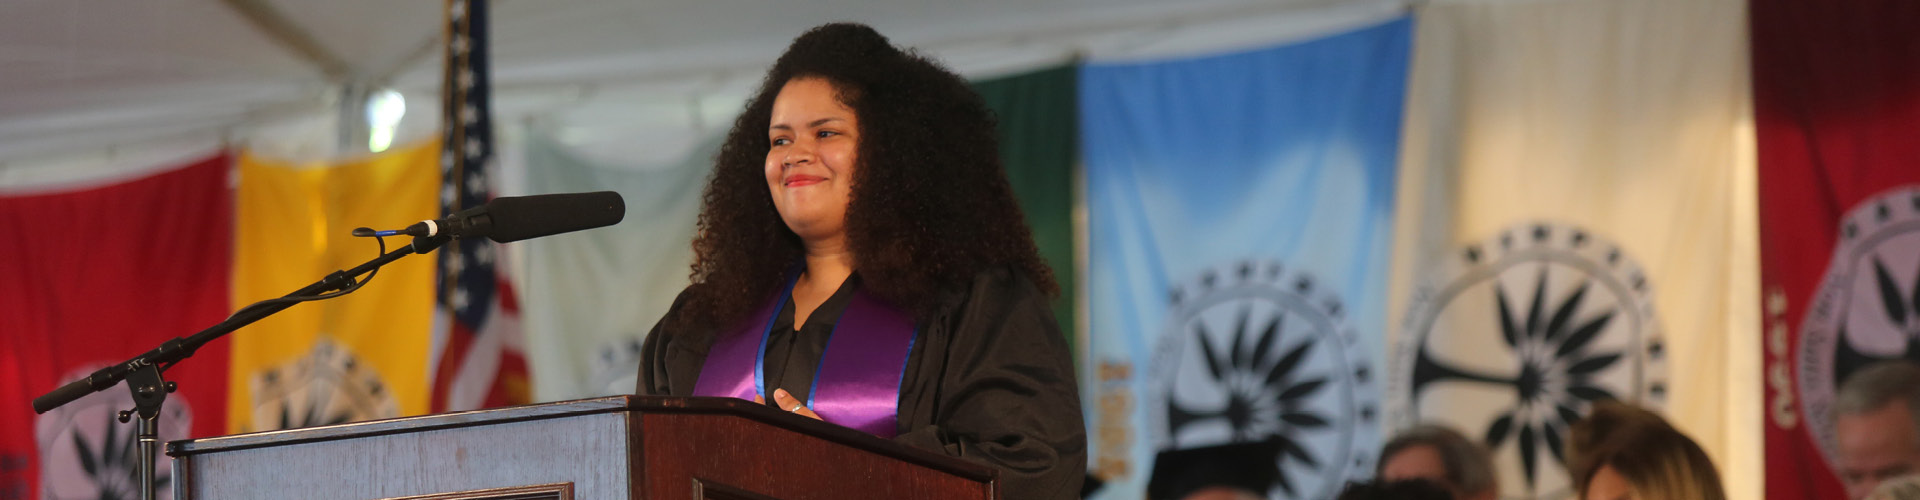 Student Speaker at Hampshire College Commencement